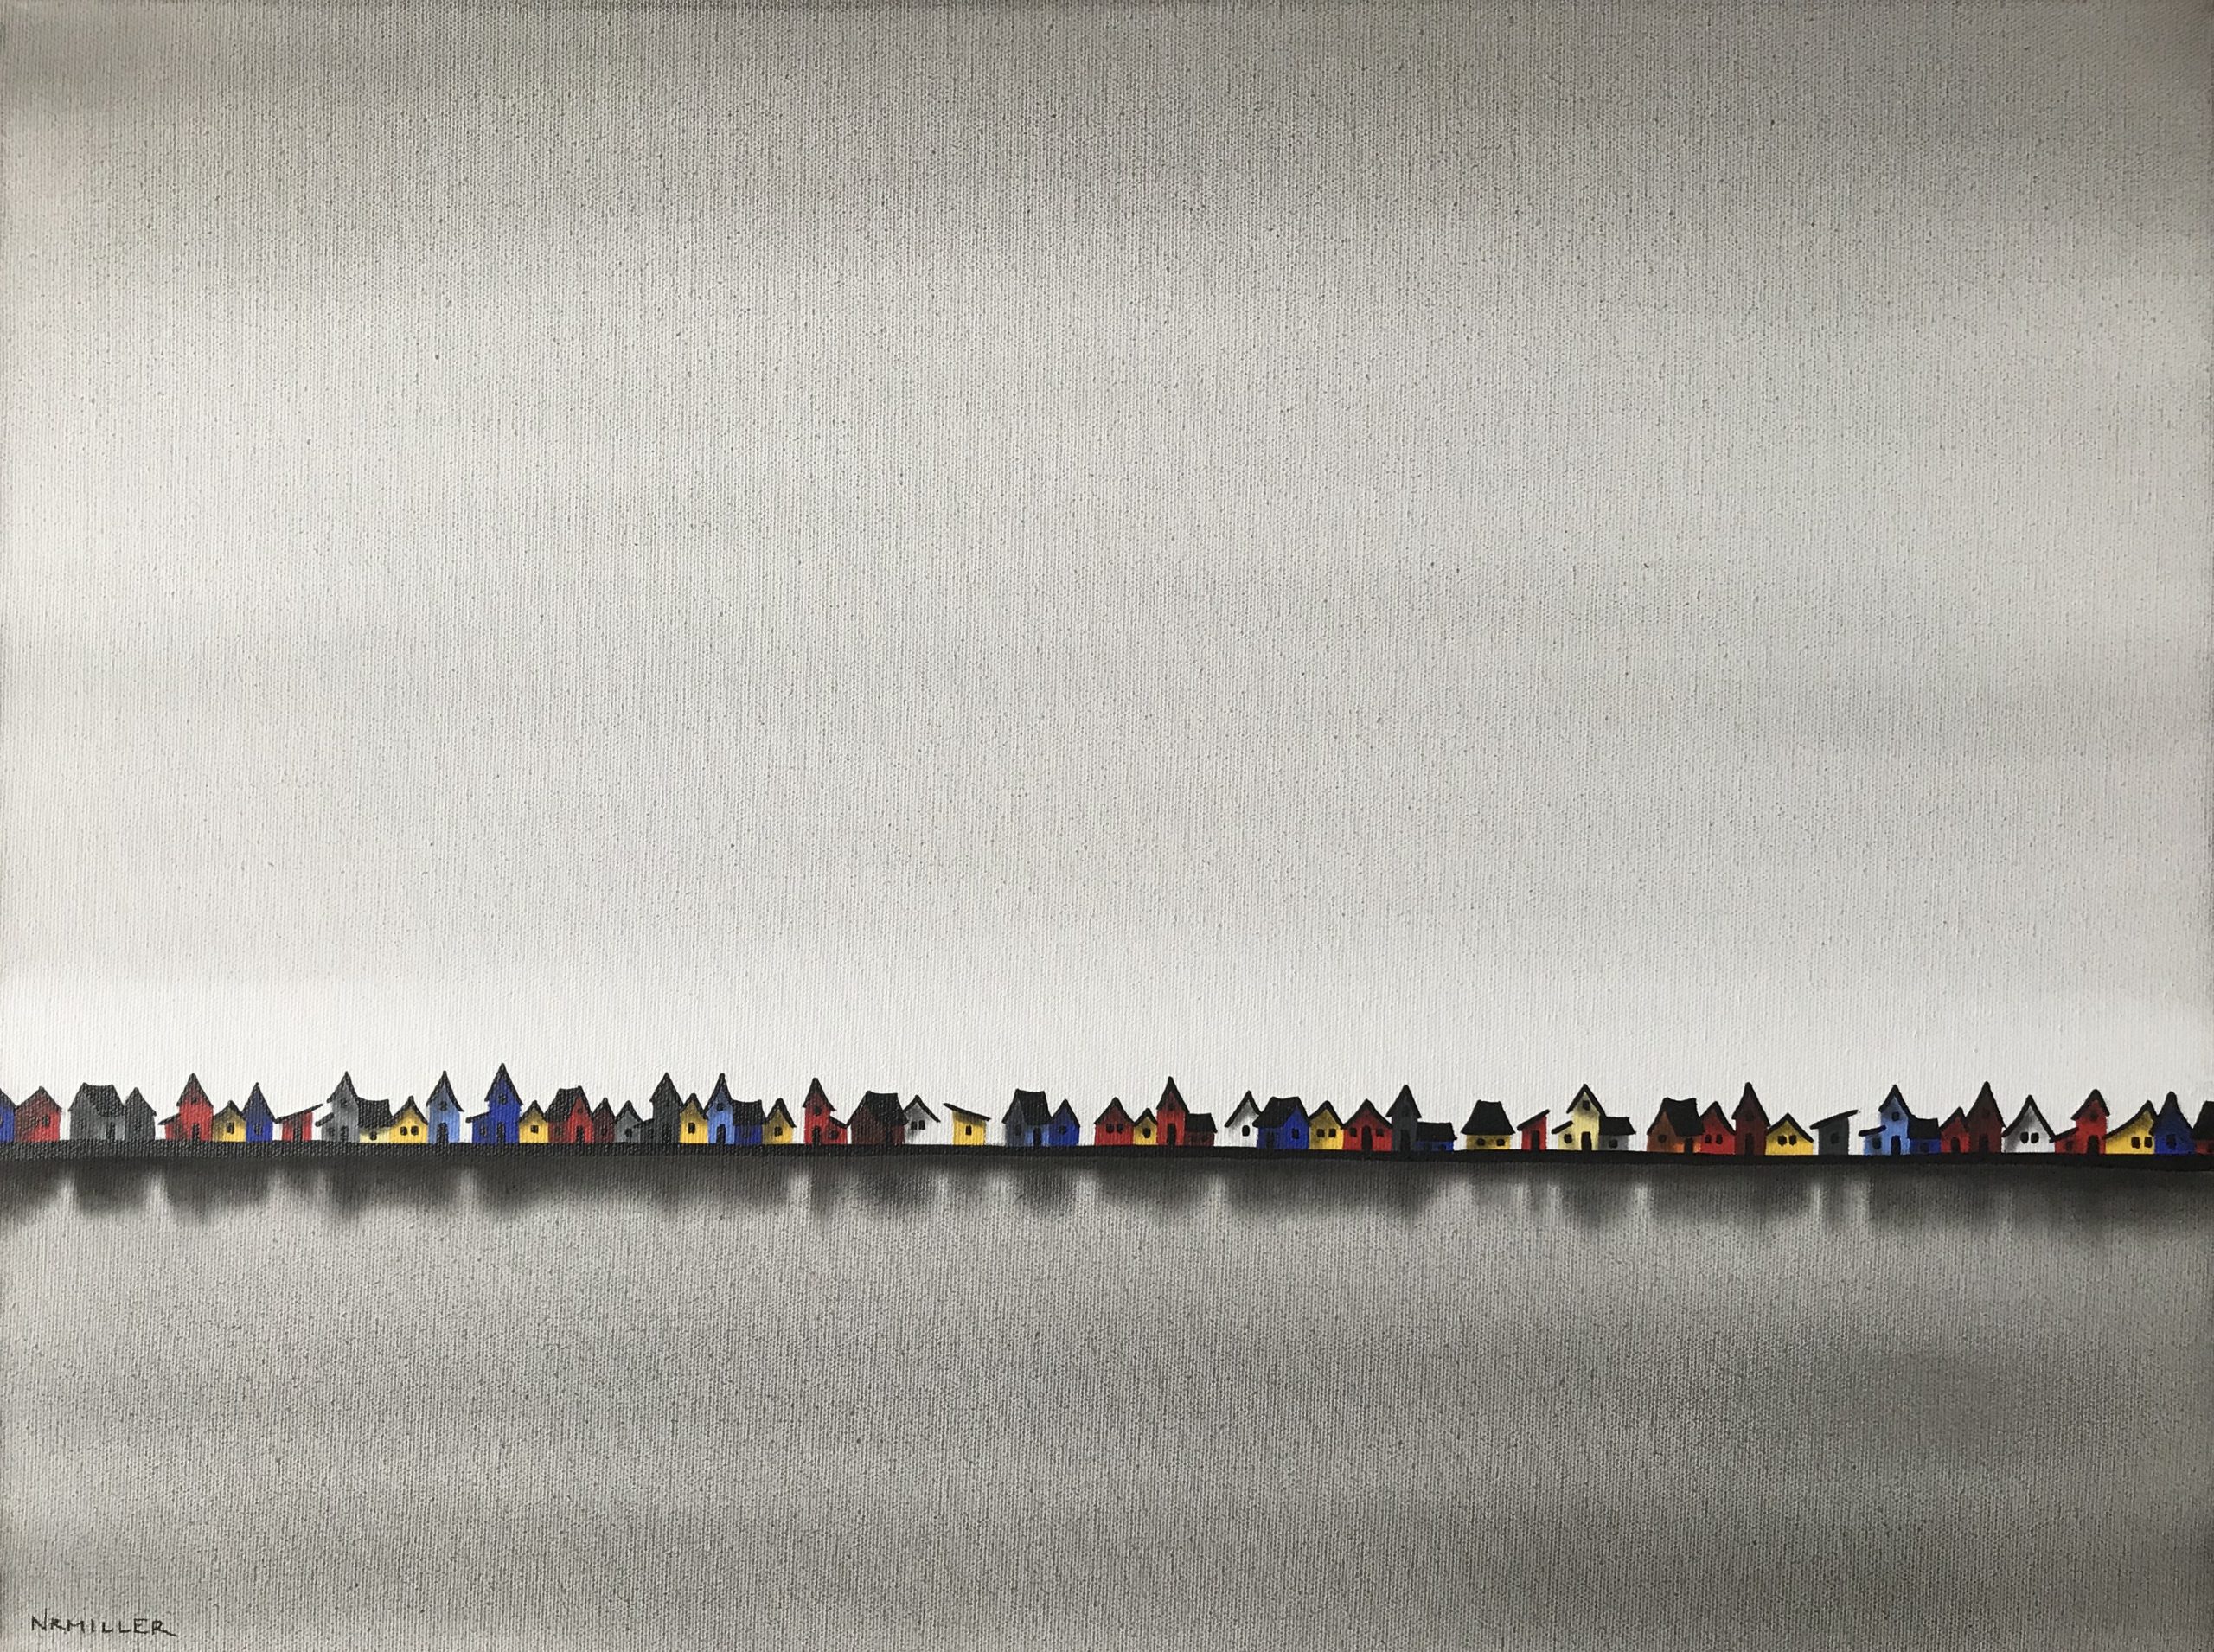 The People Were Singin', mixed media landscape painting by Natasha Miller | Effusion Art Gallery + Cast Glass Studio, Invermere BC